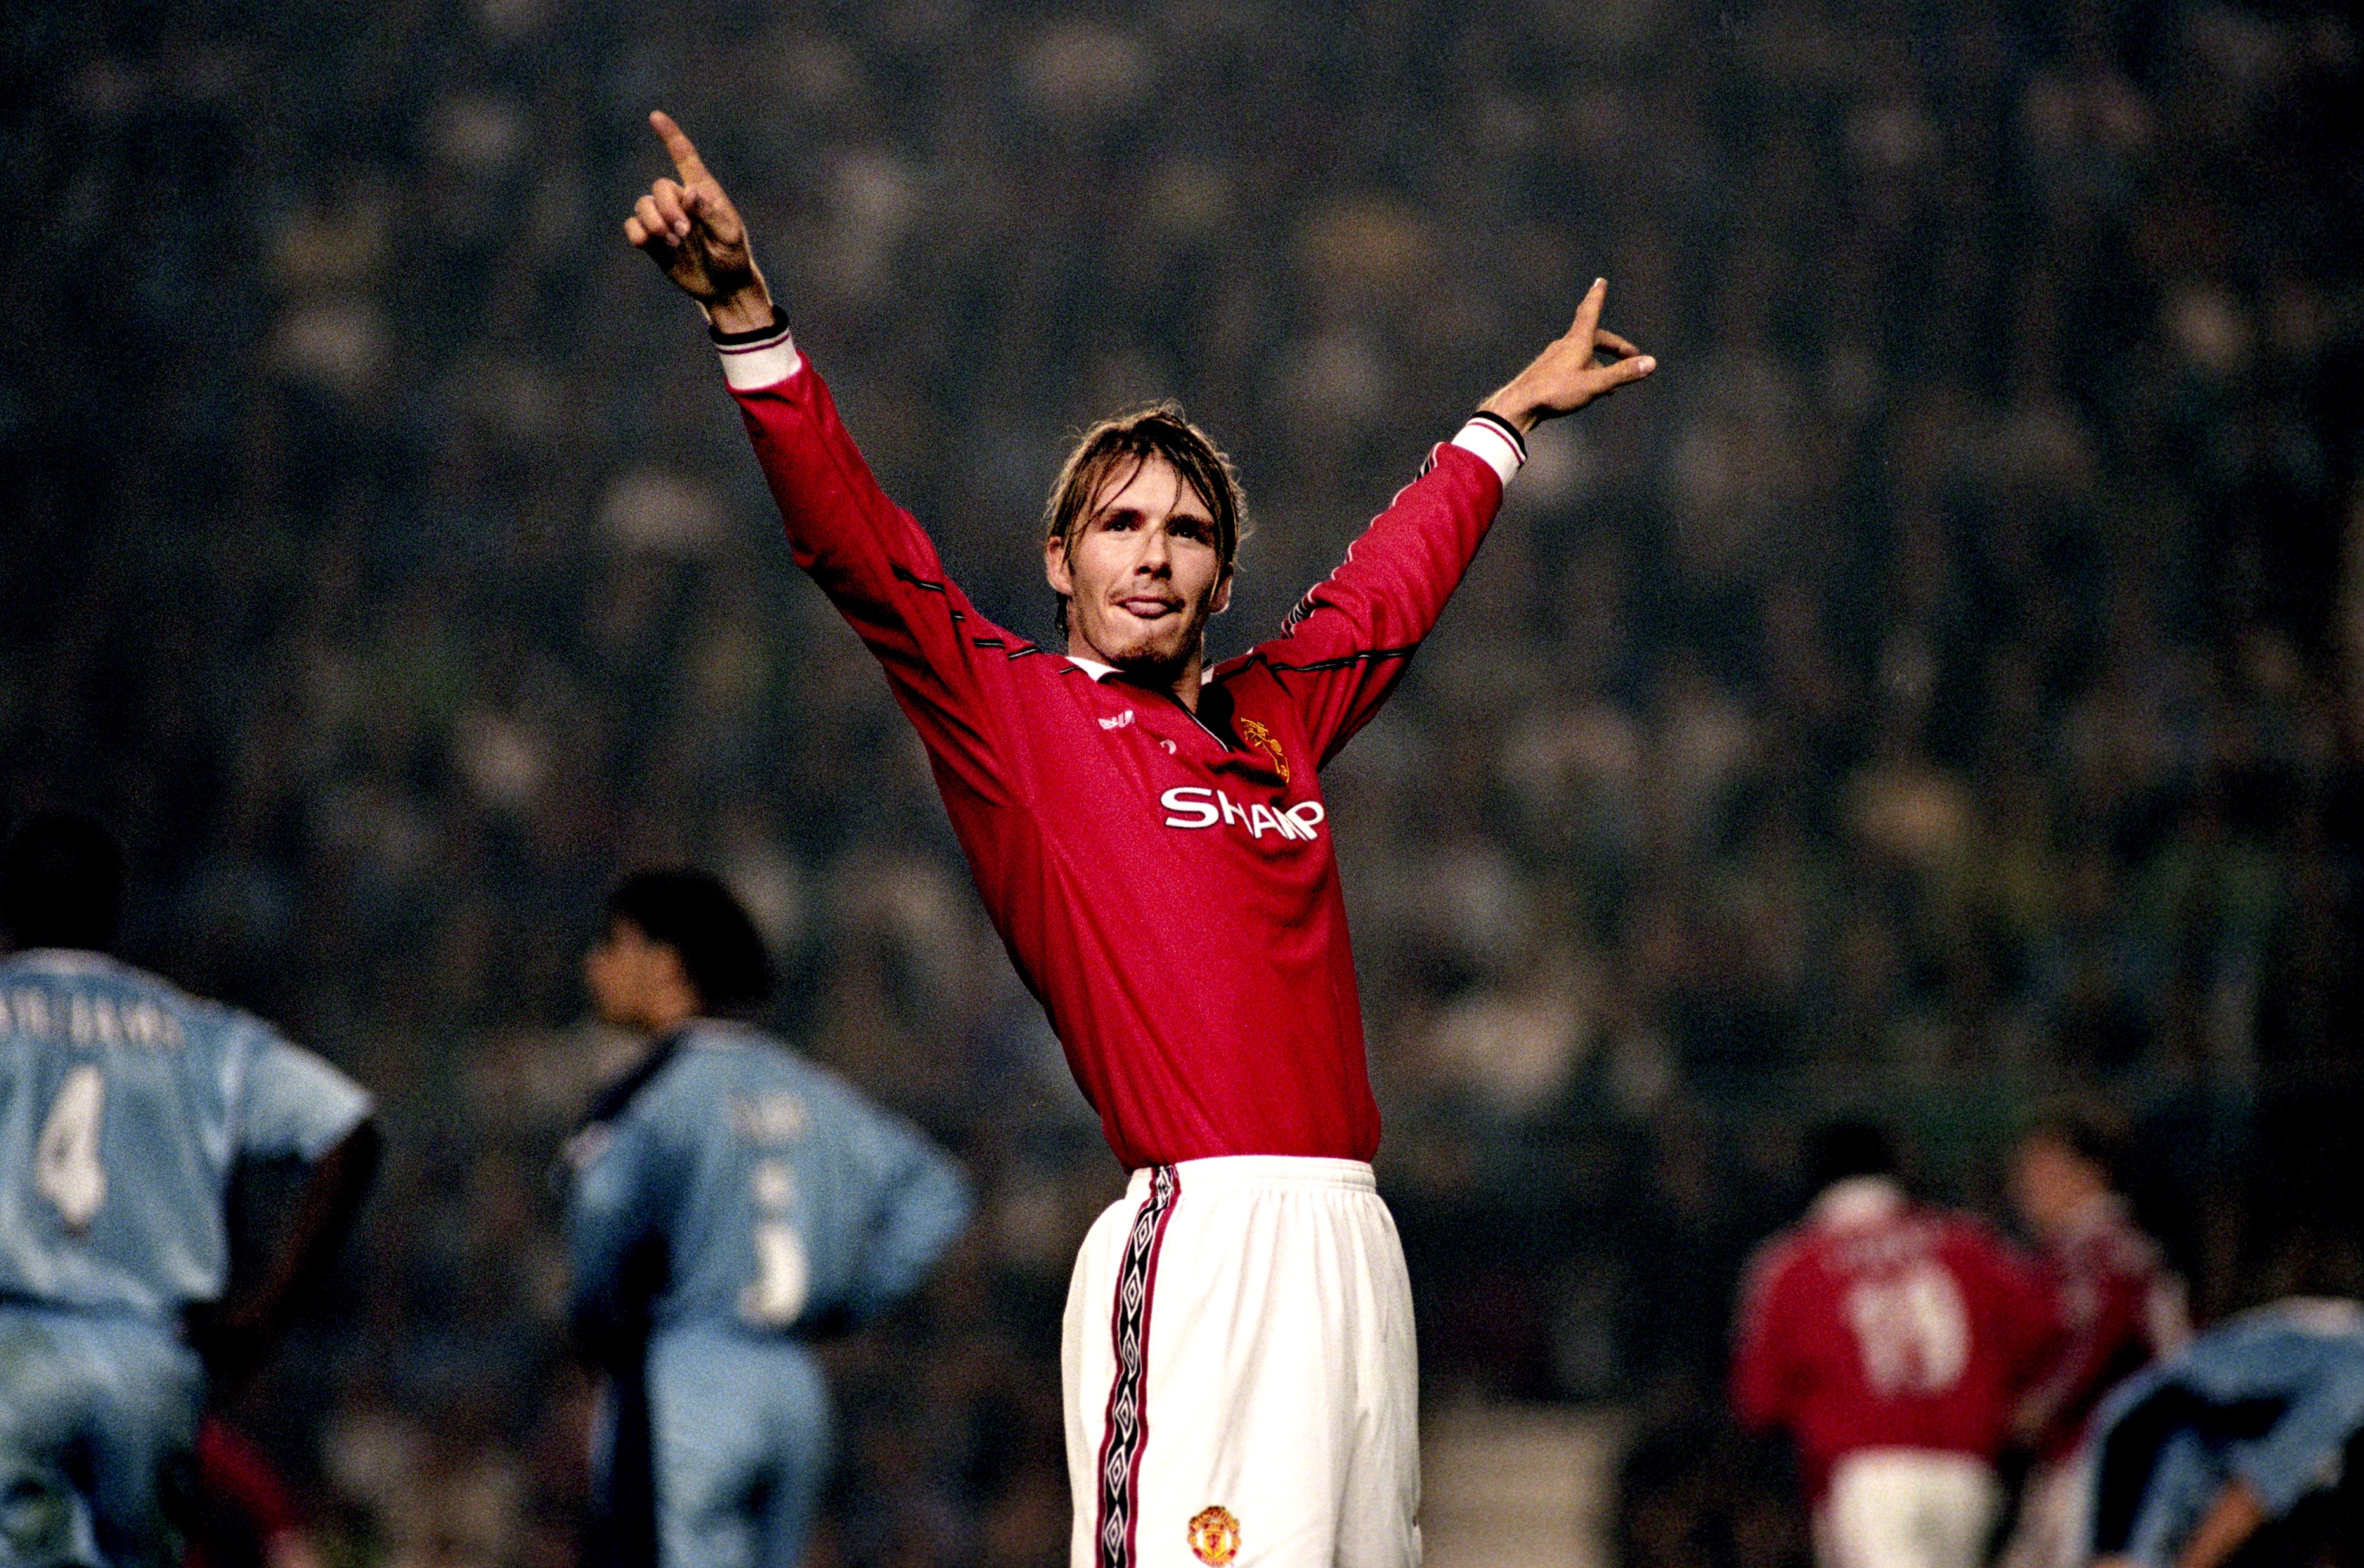 Manchester United's David Beckham celebrates their first goal.  (Photo by Steve Mitchell/EMPICS via Getty Images)